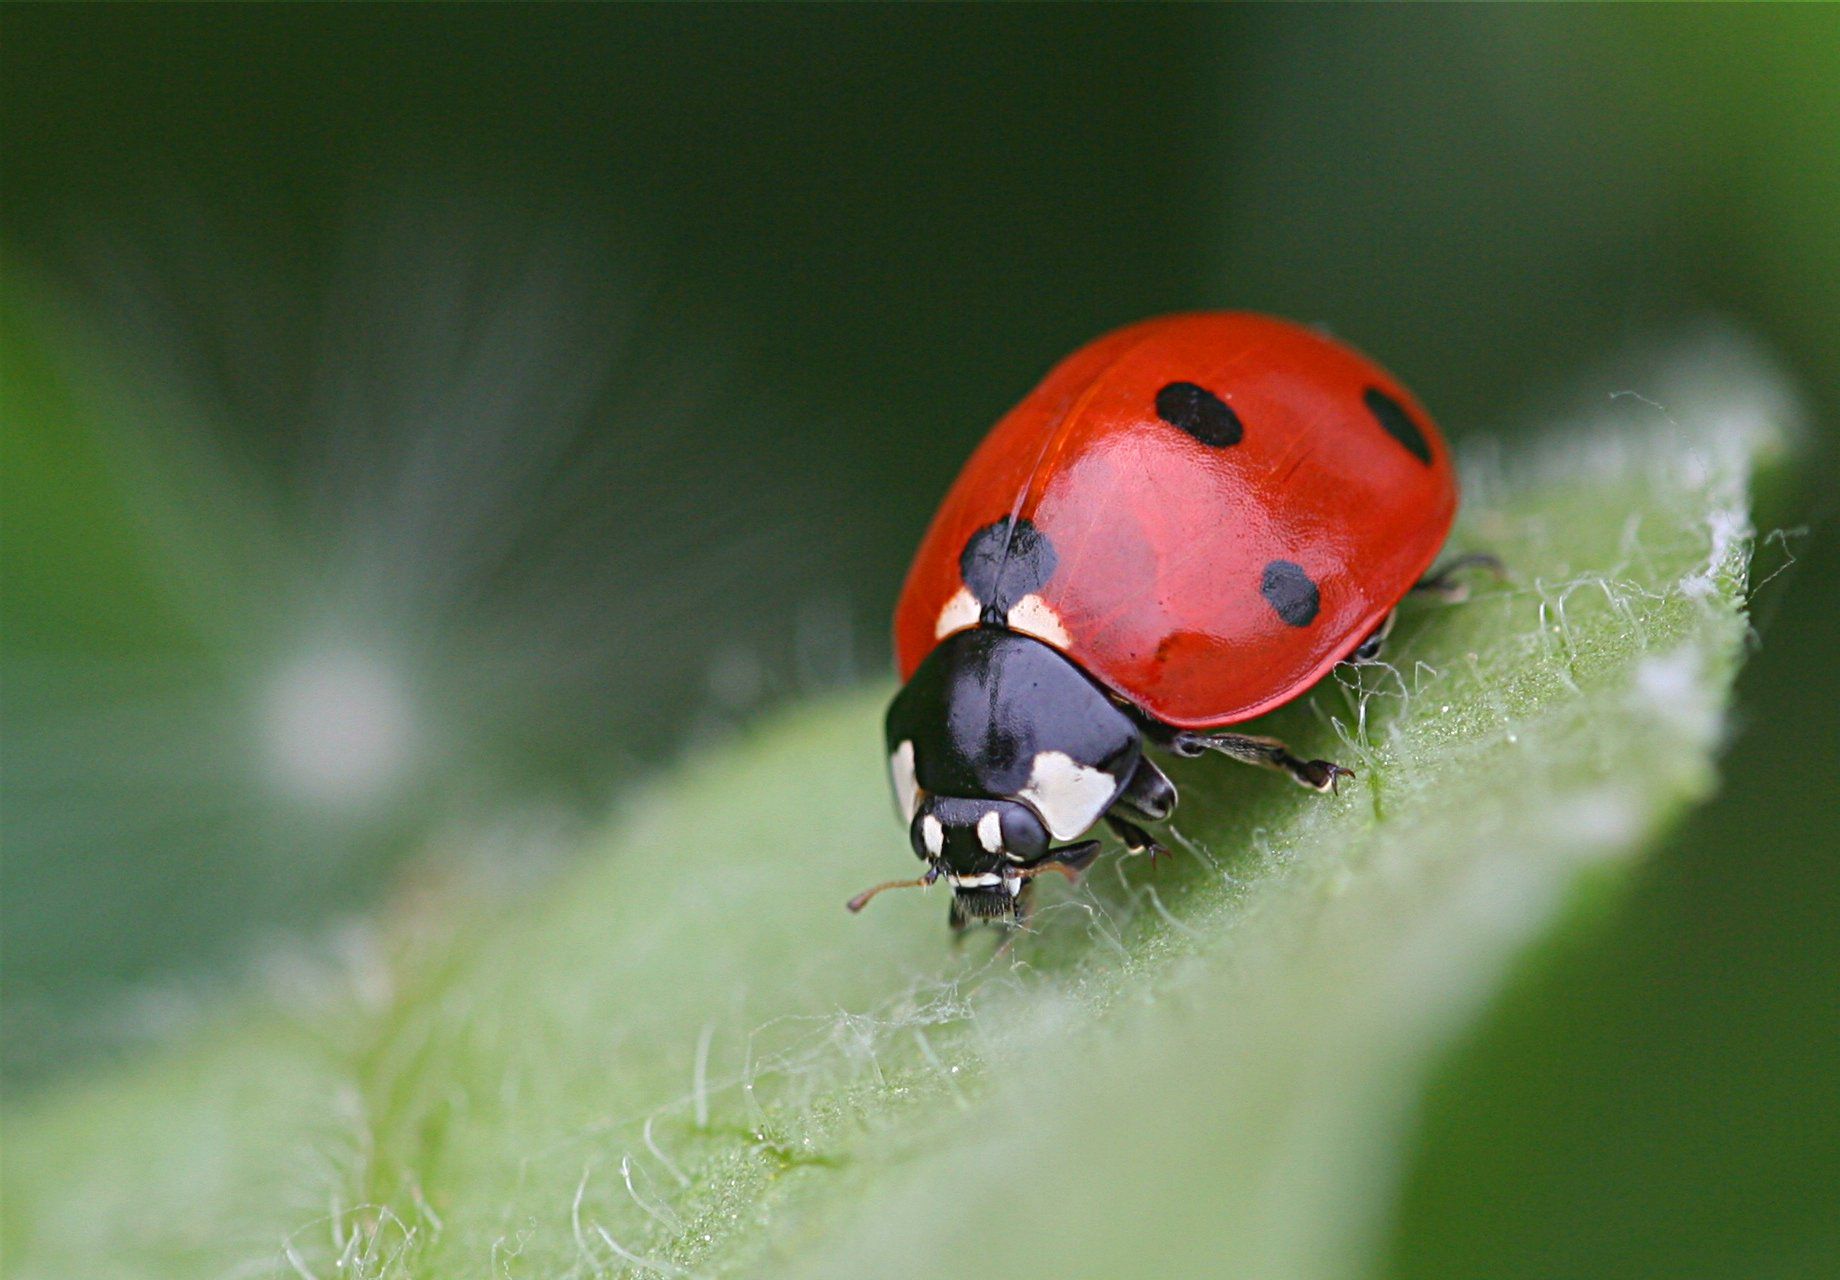 animals insects ladybug HD Wallpaper of Insects & Bugs 185